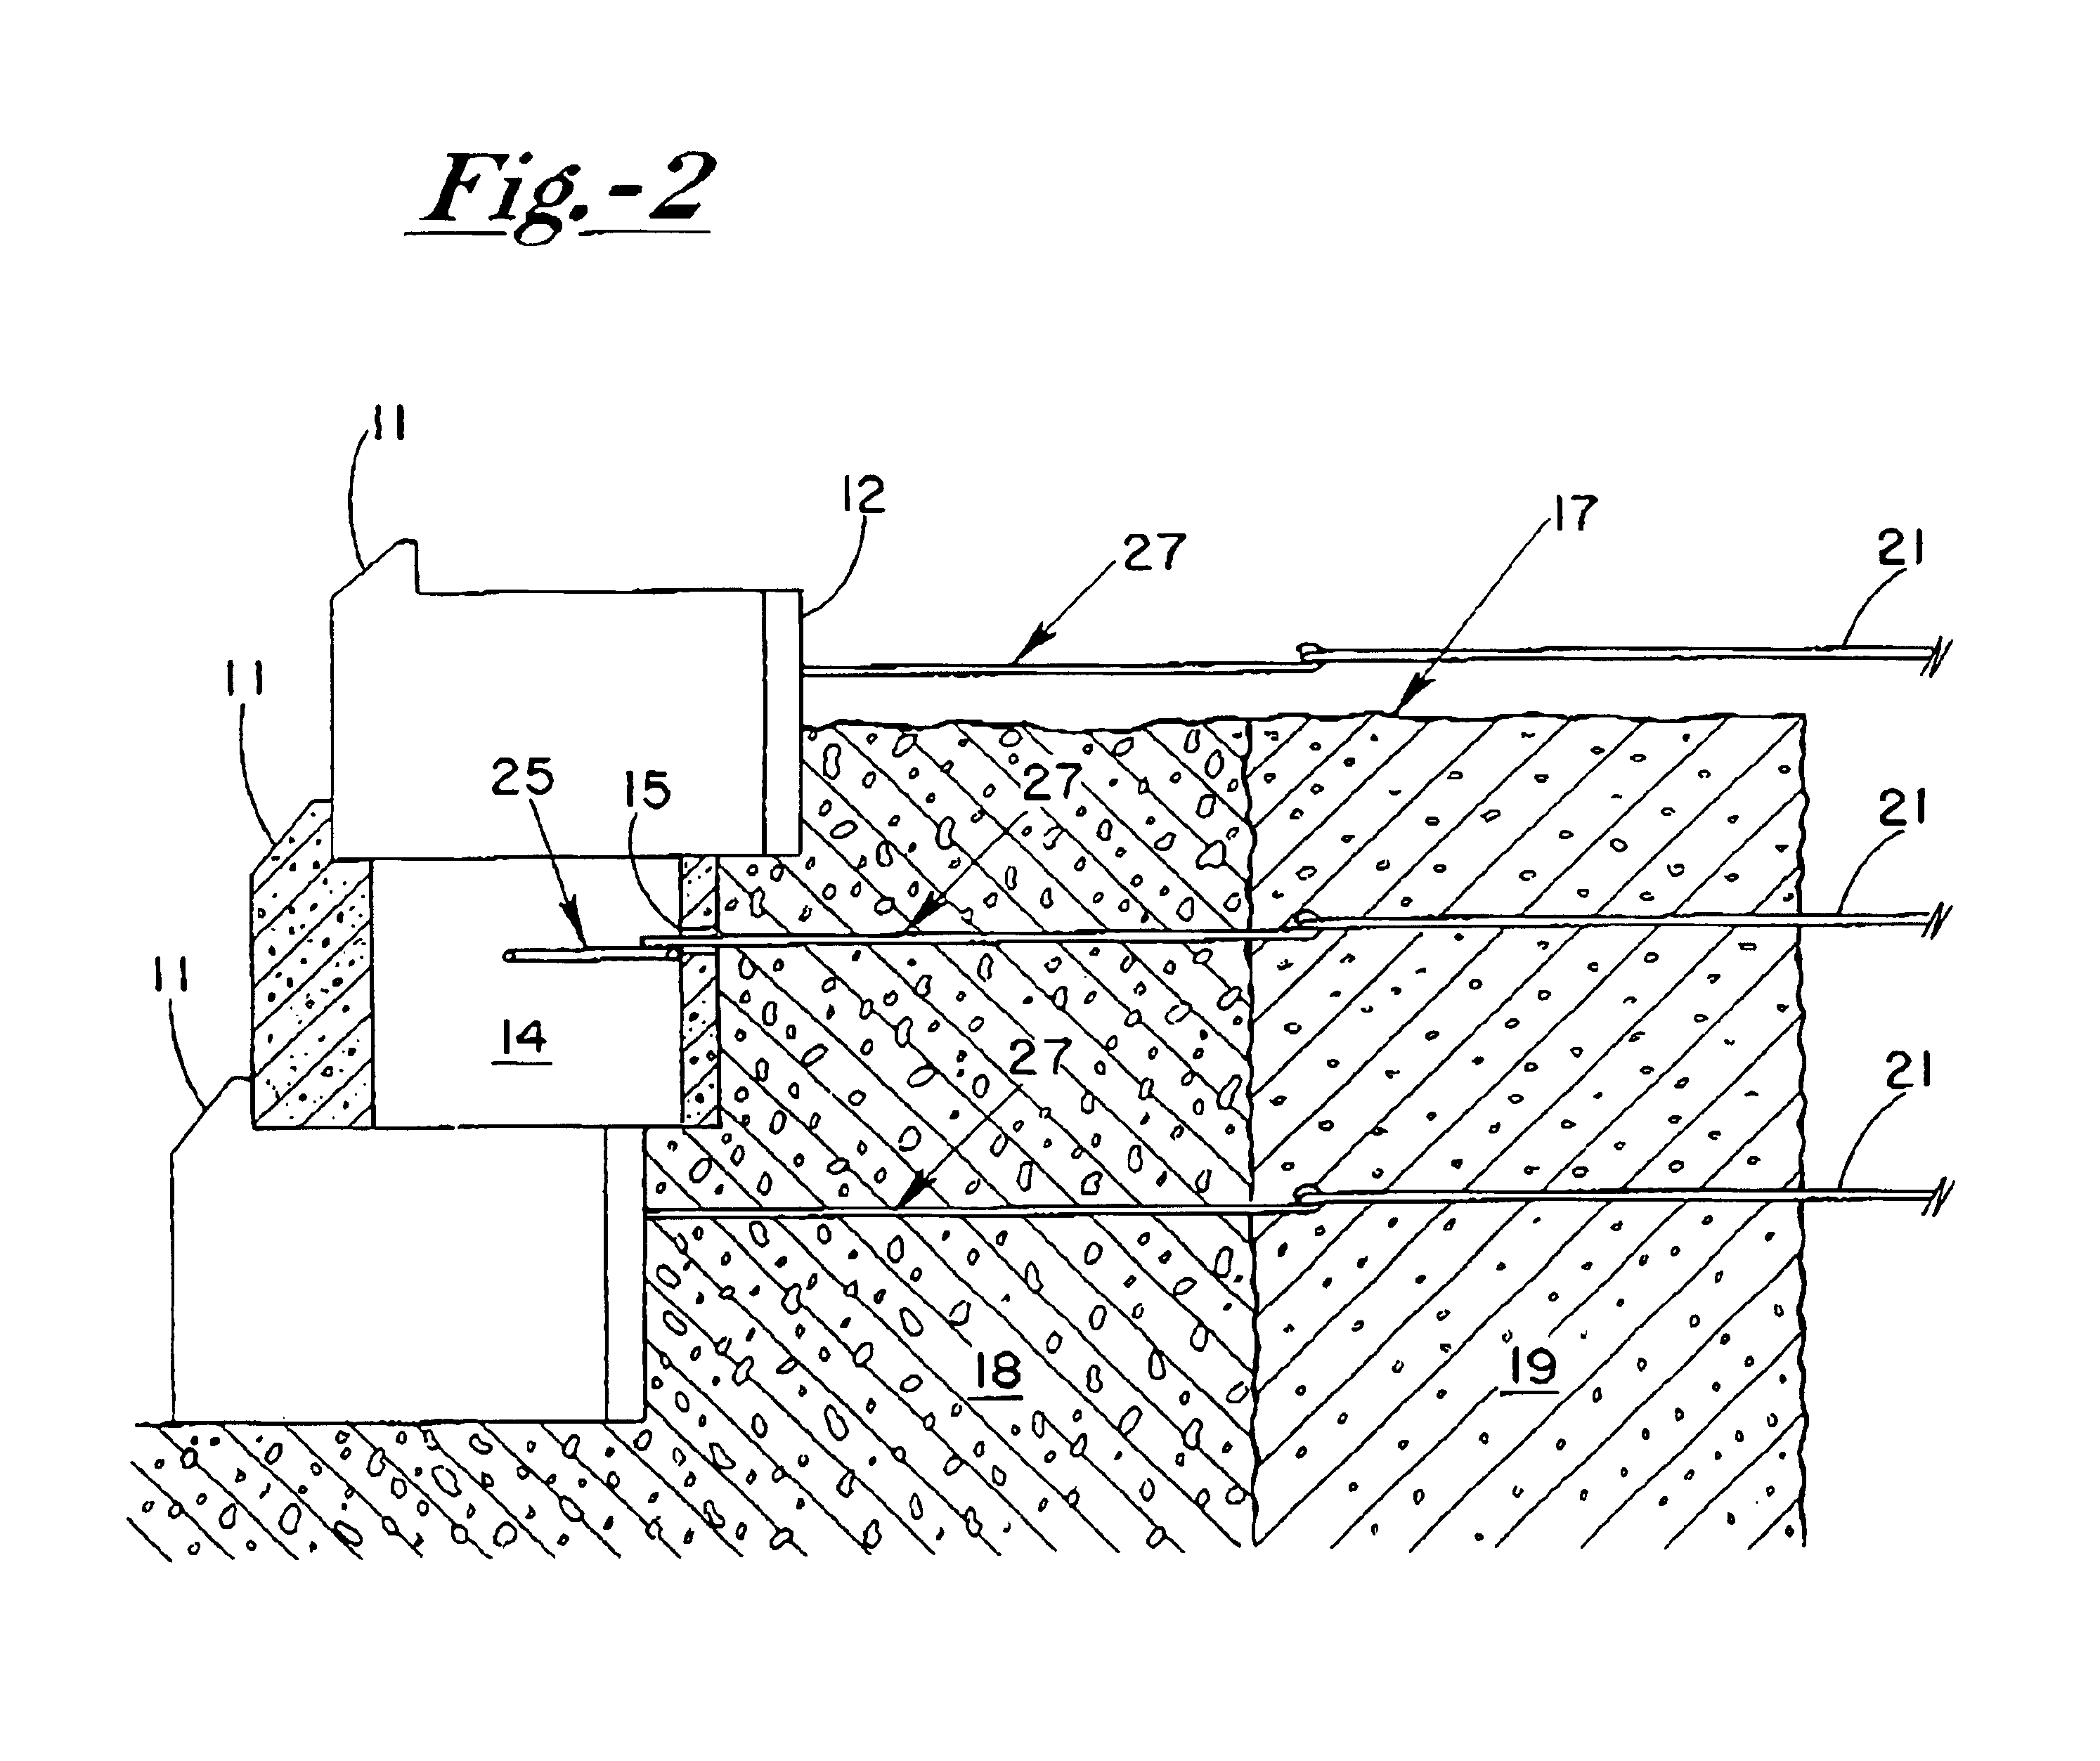 Reinforcing system for stackable retaining wall units